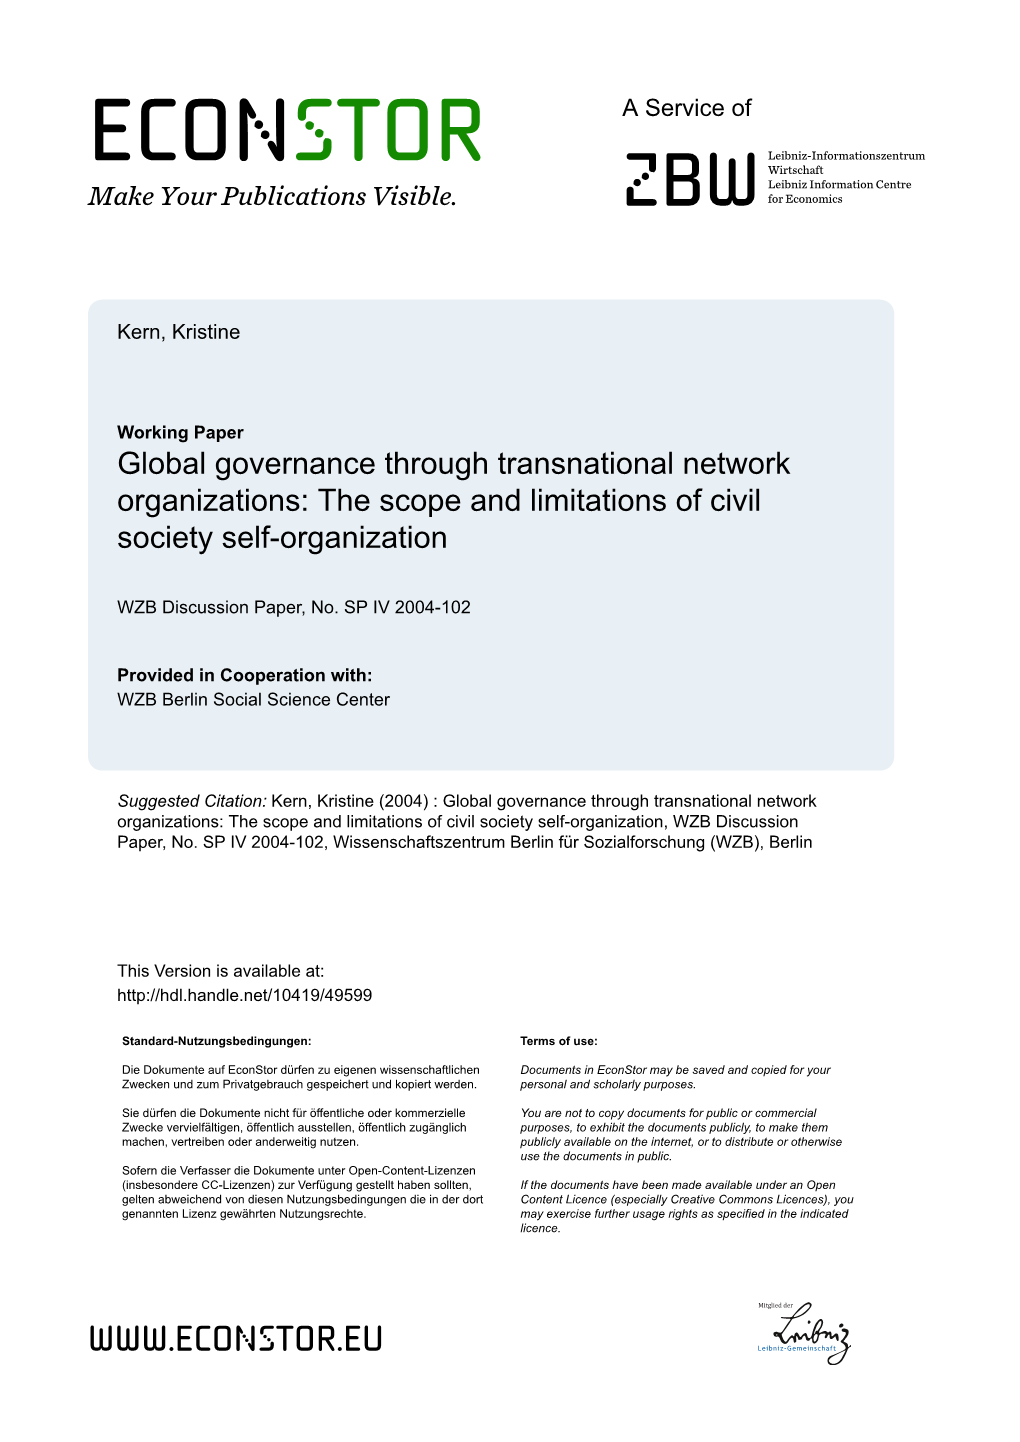 Global Governance Through Transnational Network Organizations: the Scope and Limitations of Civil Society Self-Organization